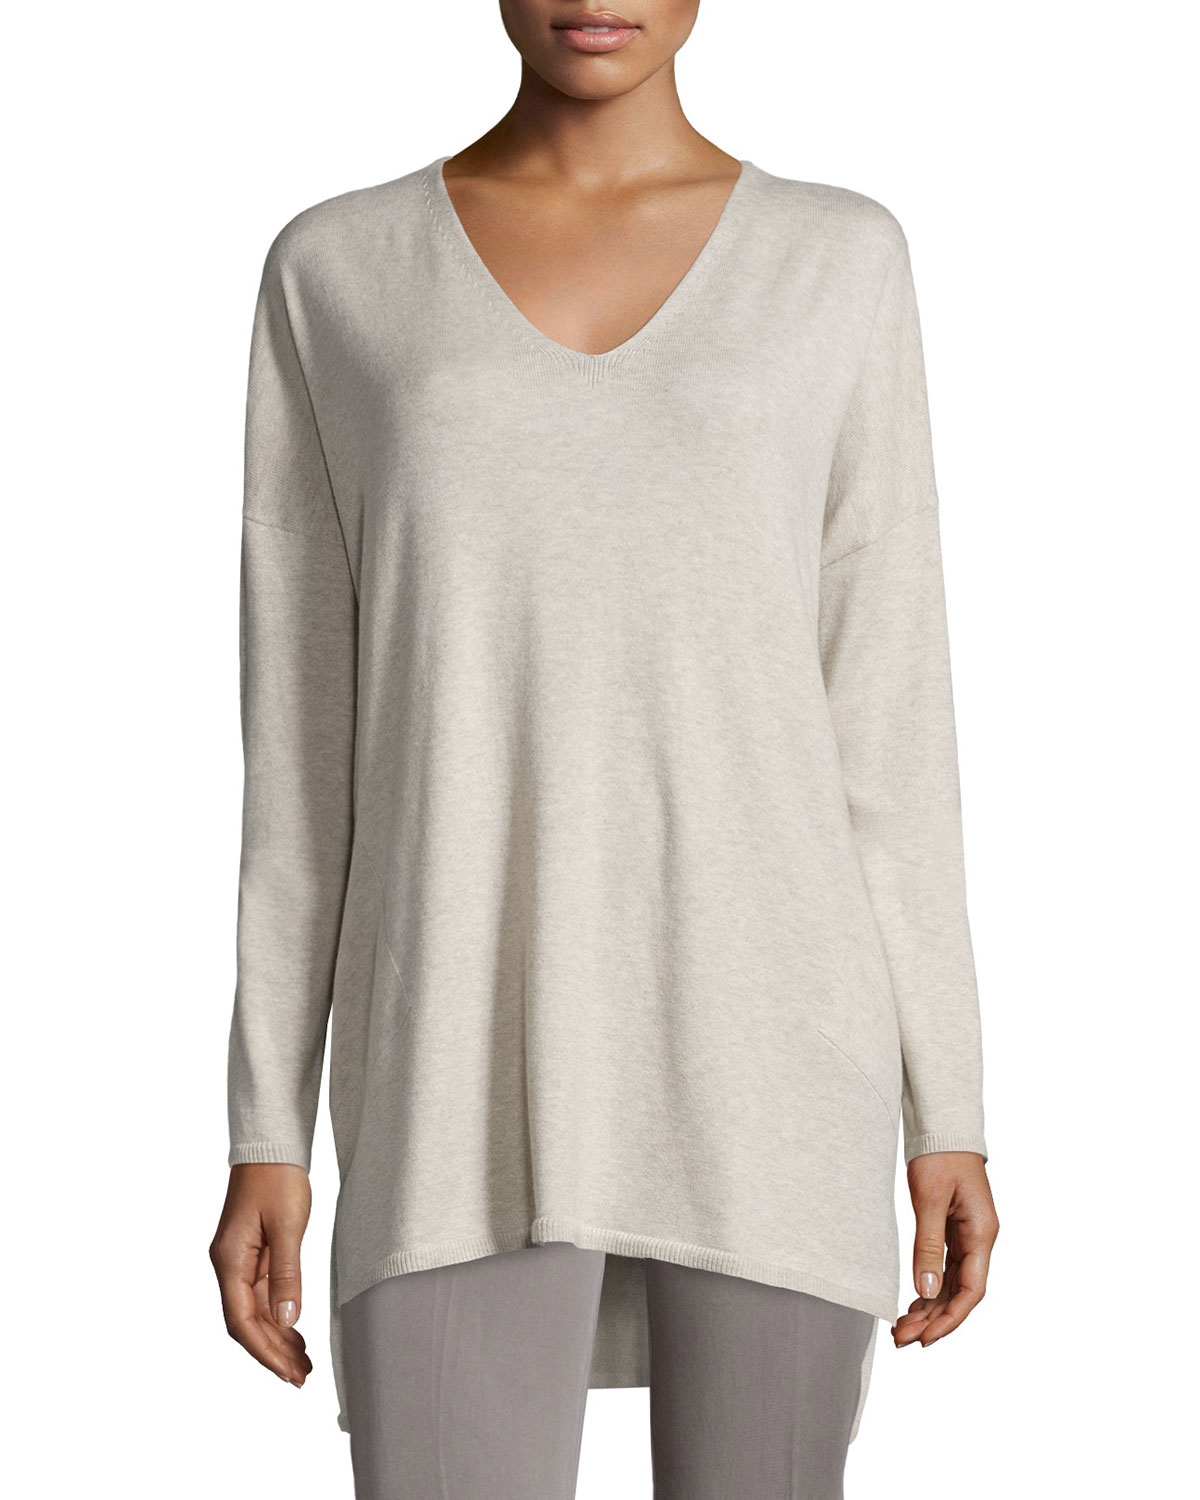 Lyst - Eileen Fisher V-neck Organic Cotton Tunic With Pockets in Gray